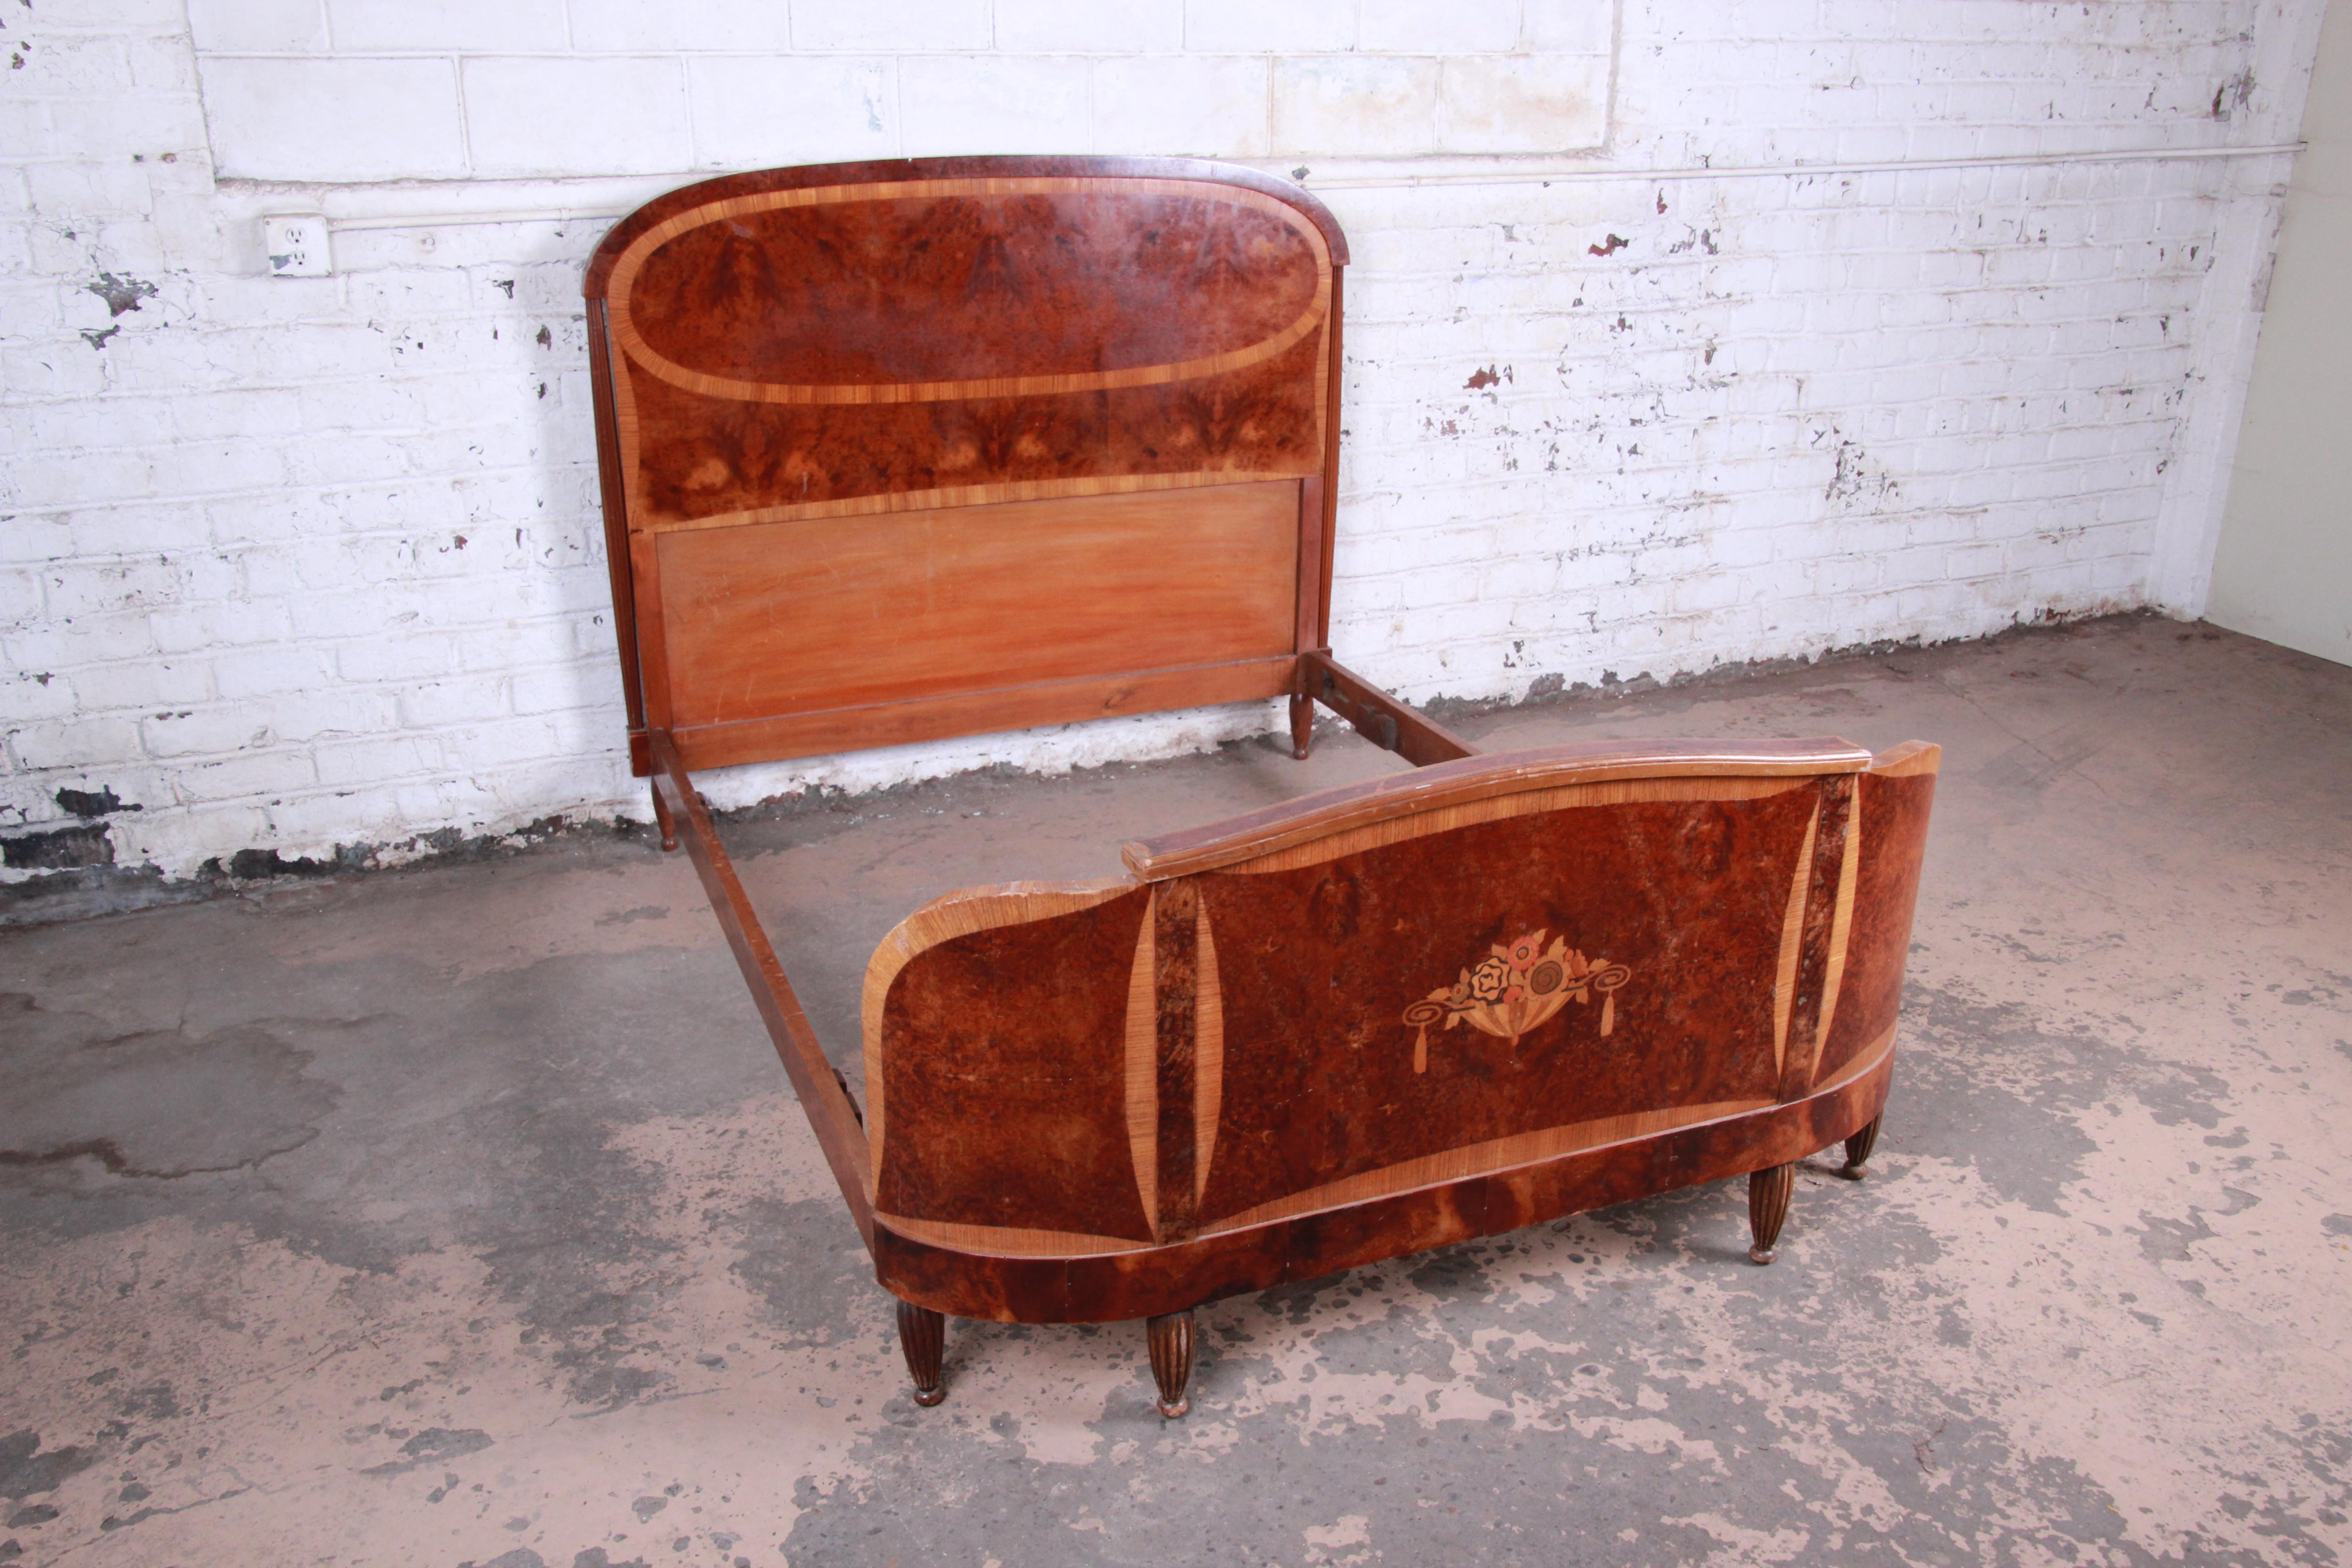 A gorgeous original 1930s French Art Deco bow front full size bed frame. The bed features stunning burl wood grain and inlaid marquetry. Recently imported from Southern France. This outstanding bed is sturdy and ready for use. It is in good original